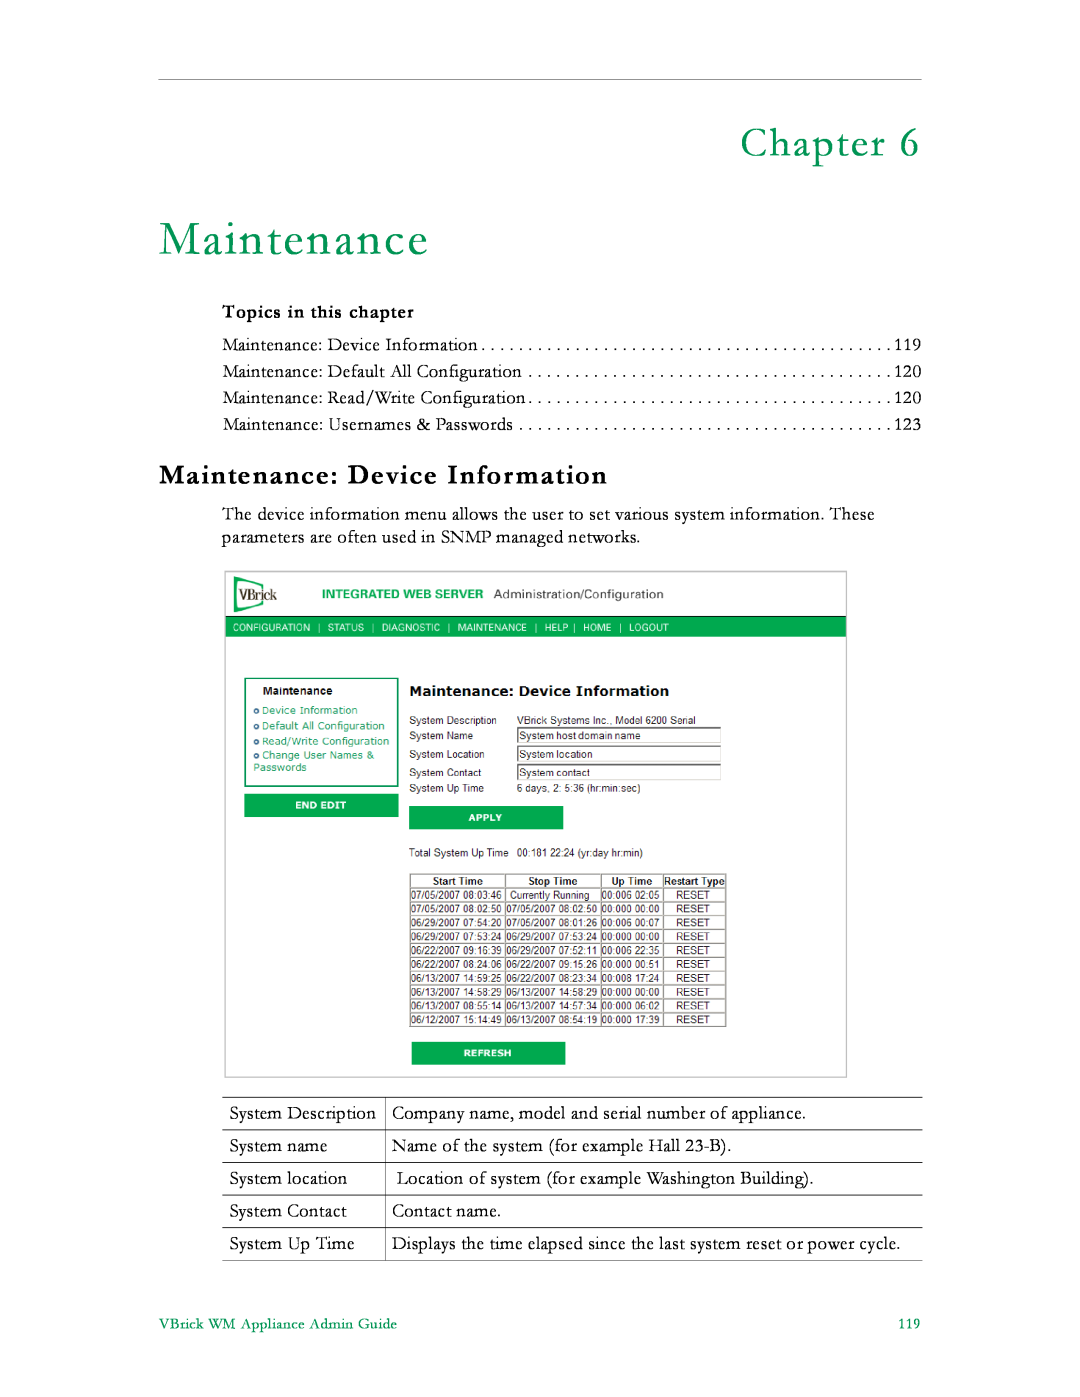 VBrick Systems VB6000, VB4000, VB5000 manual Maintenance Device Information, Chapter, Topics in this chapter 